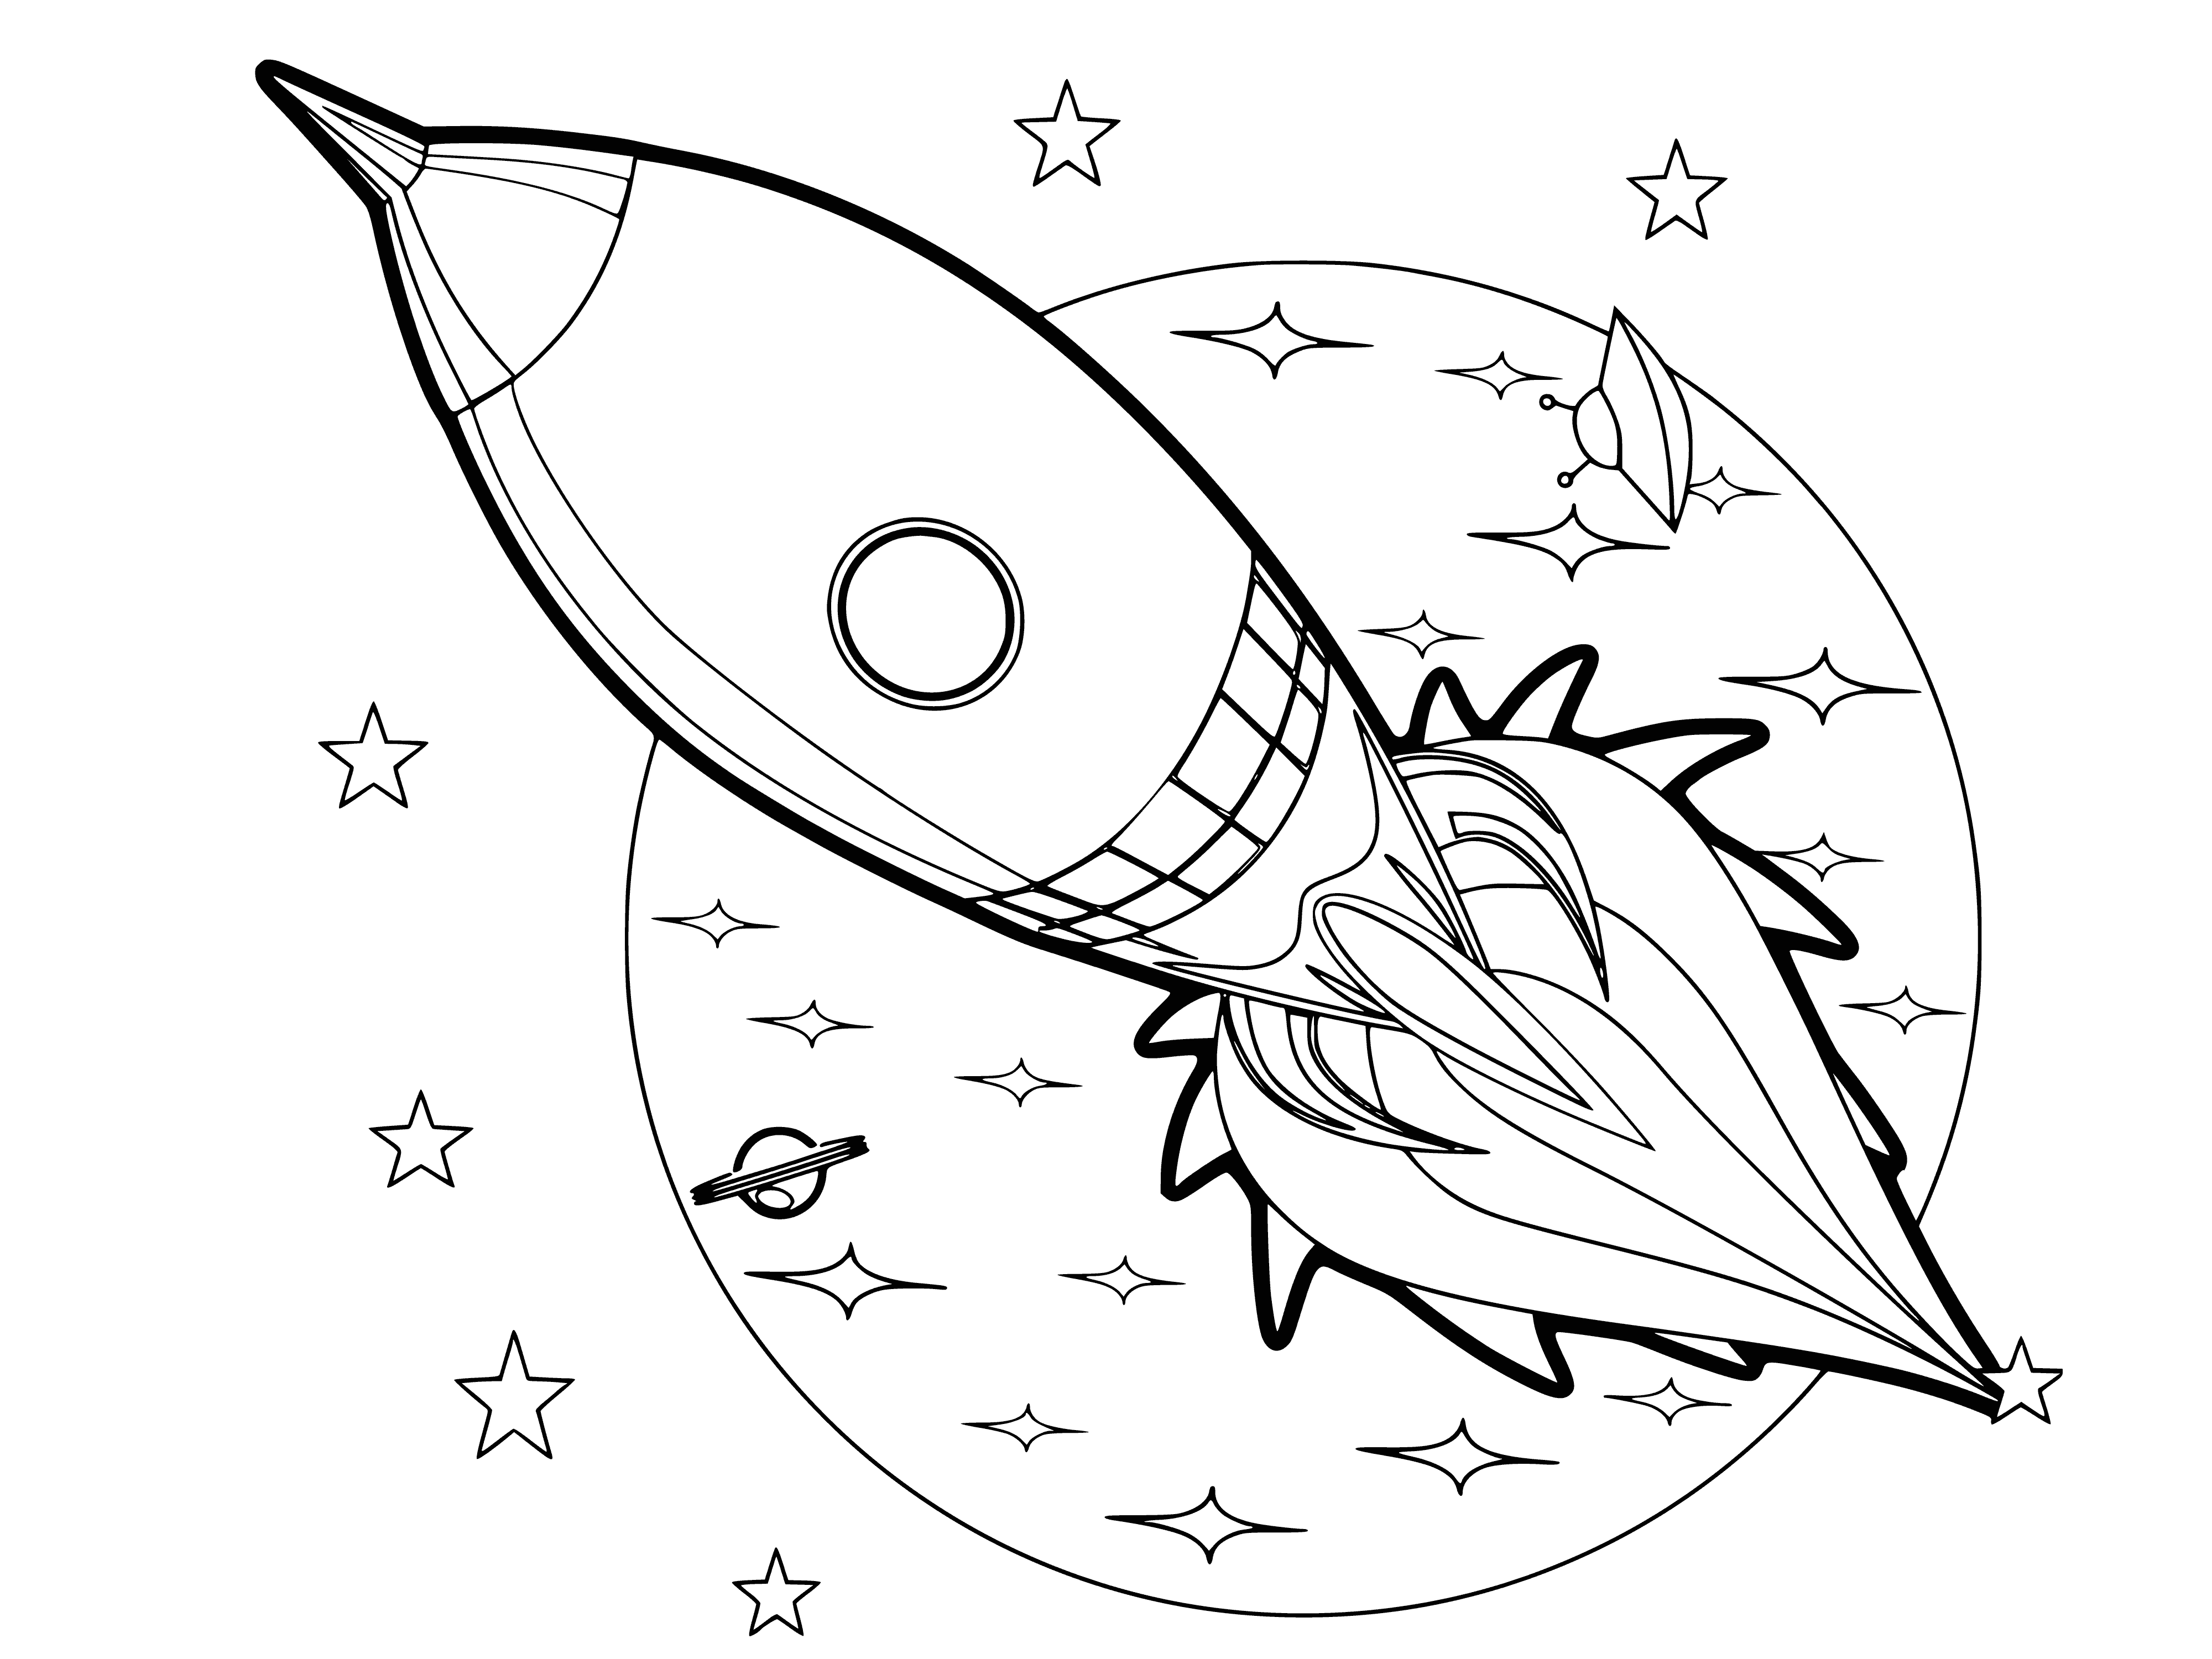 coloring page: Large rocket on launchpad: long cylindrical body, pointed nosecone; several large red boosters; white body with blue stripes.